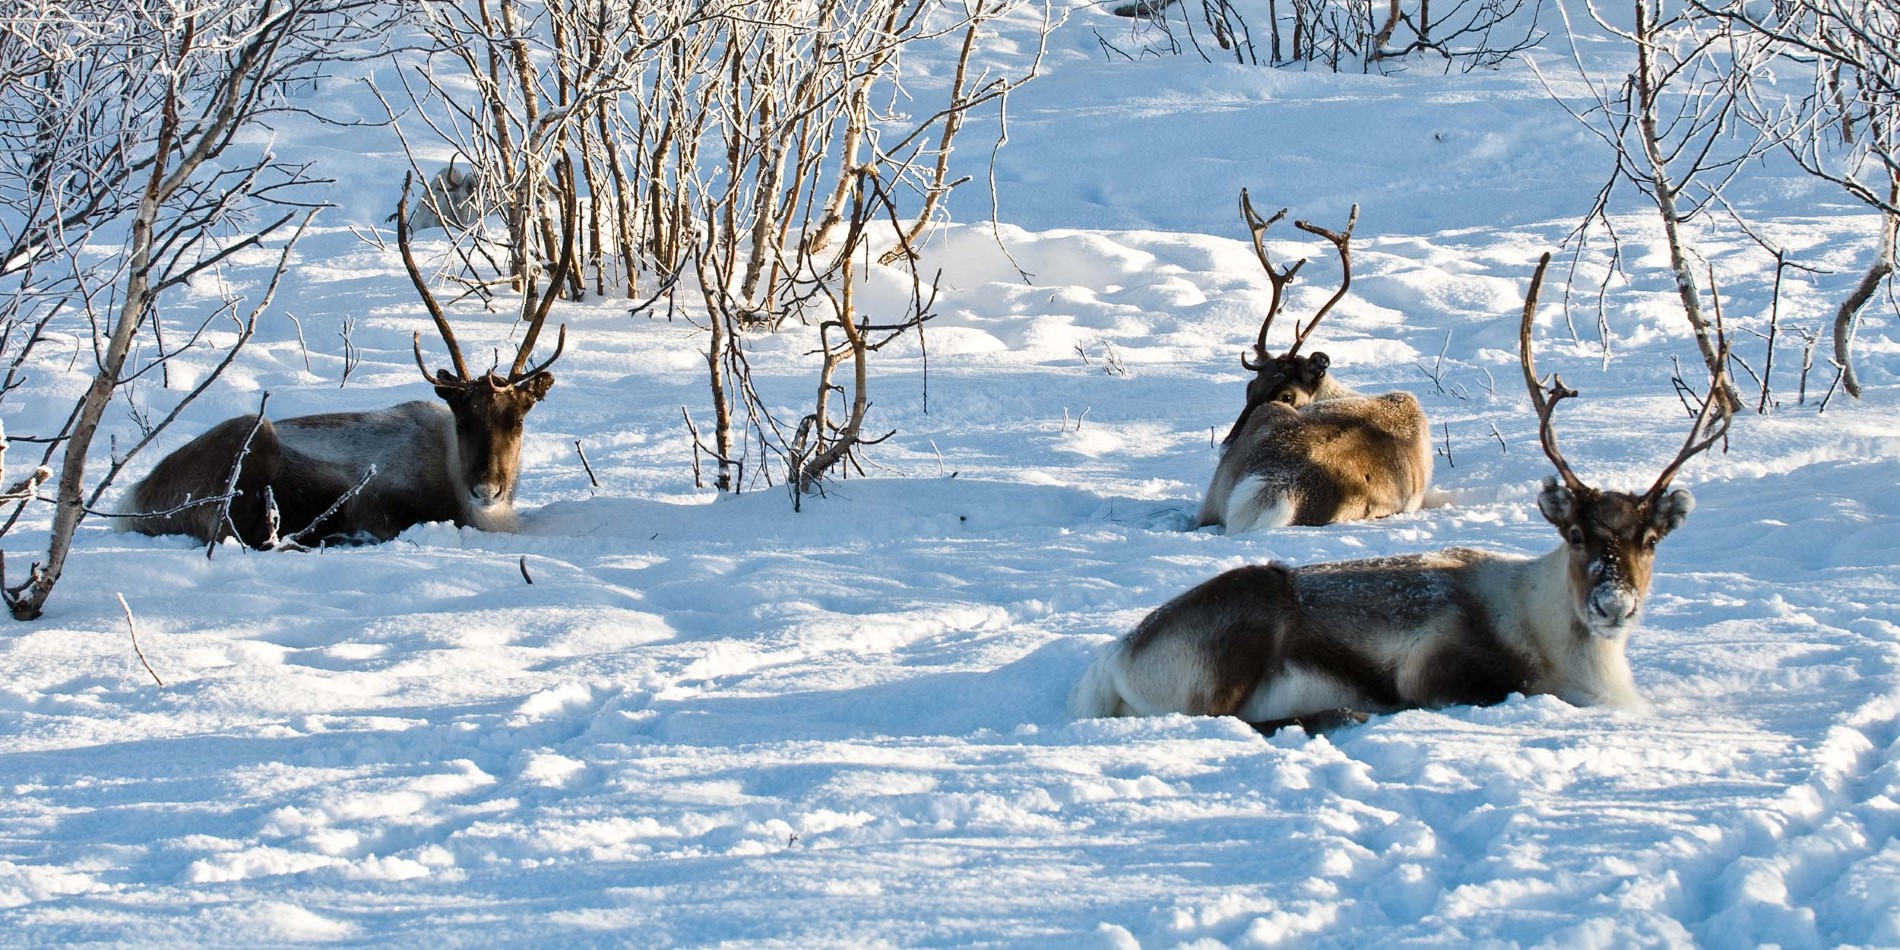 Reindeer is well adapted to live in the Northern hemisphere 